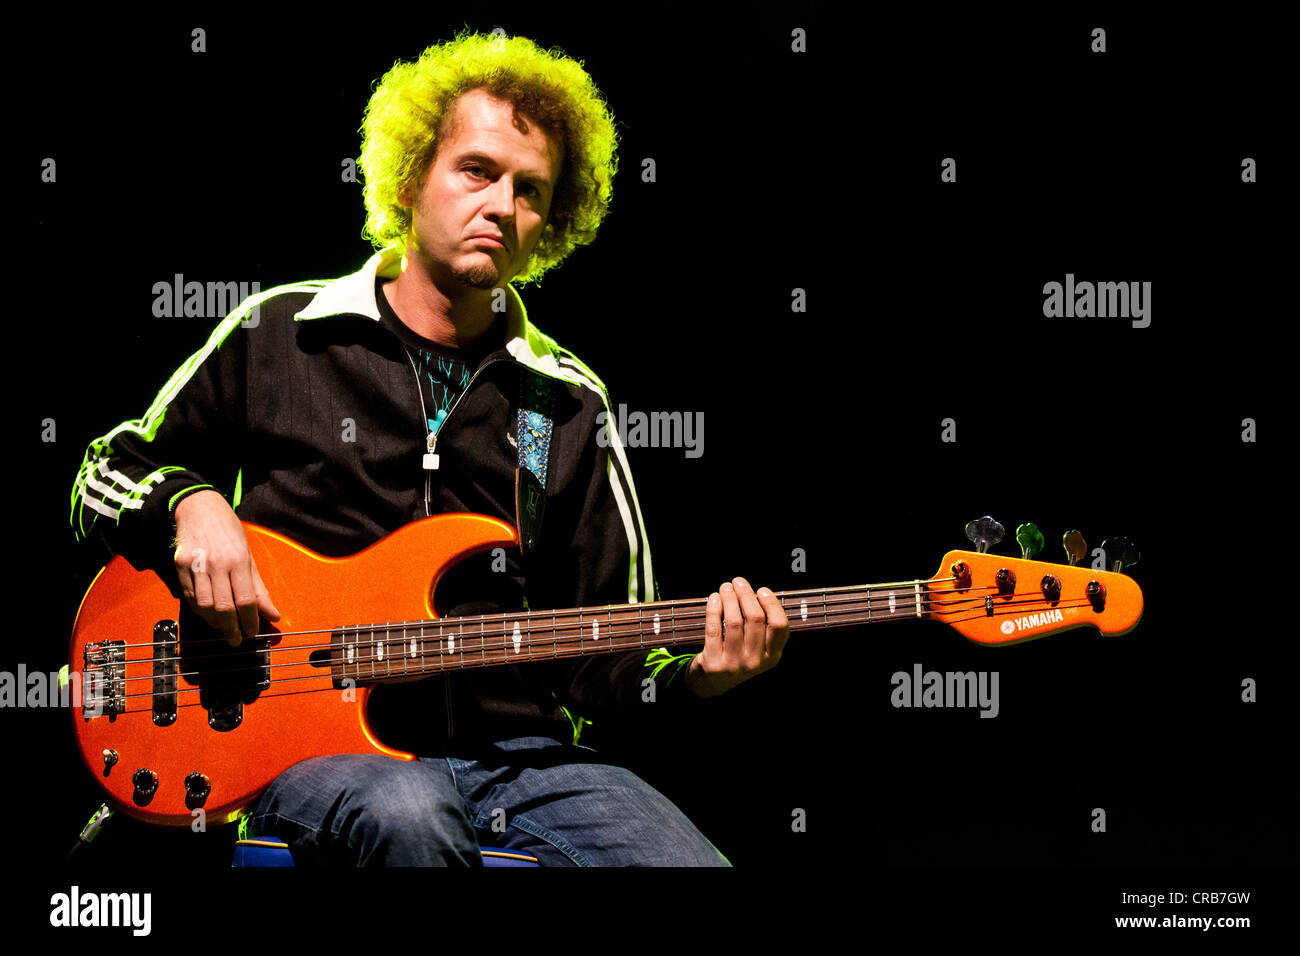 Manfred Puchner, bassist and guitarist of the Bavarian-German singer-songwriter Hans Soellner, performing live in the Schueuer Stock Photo